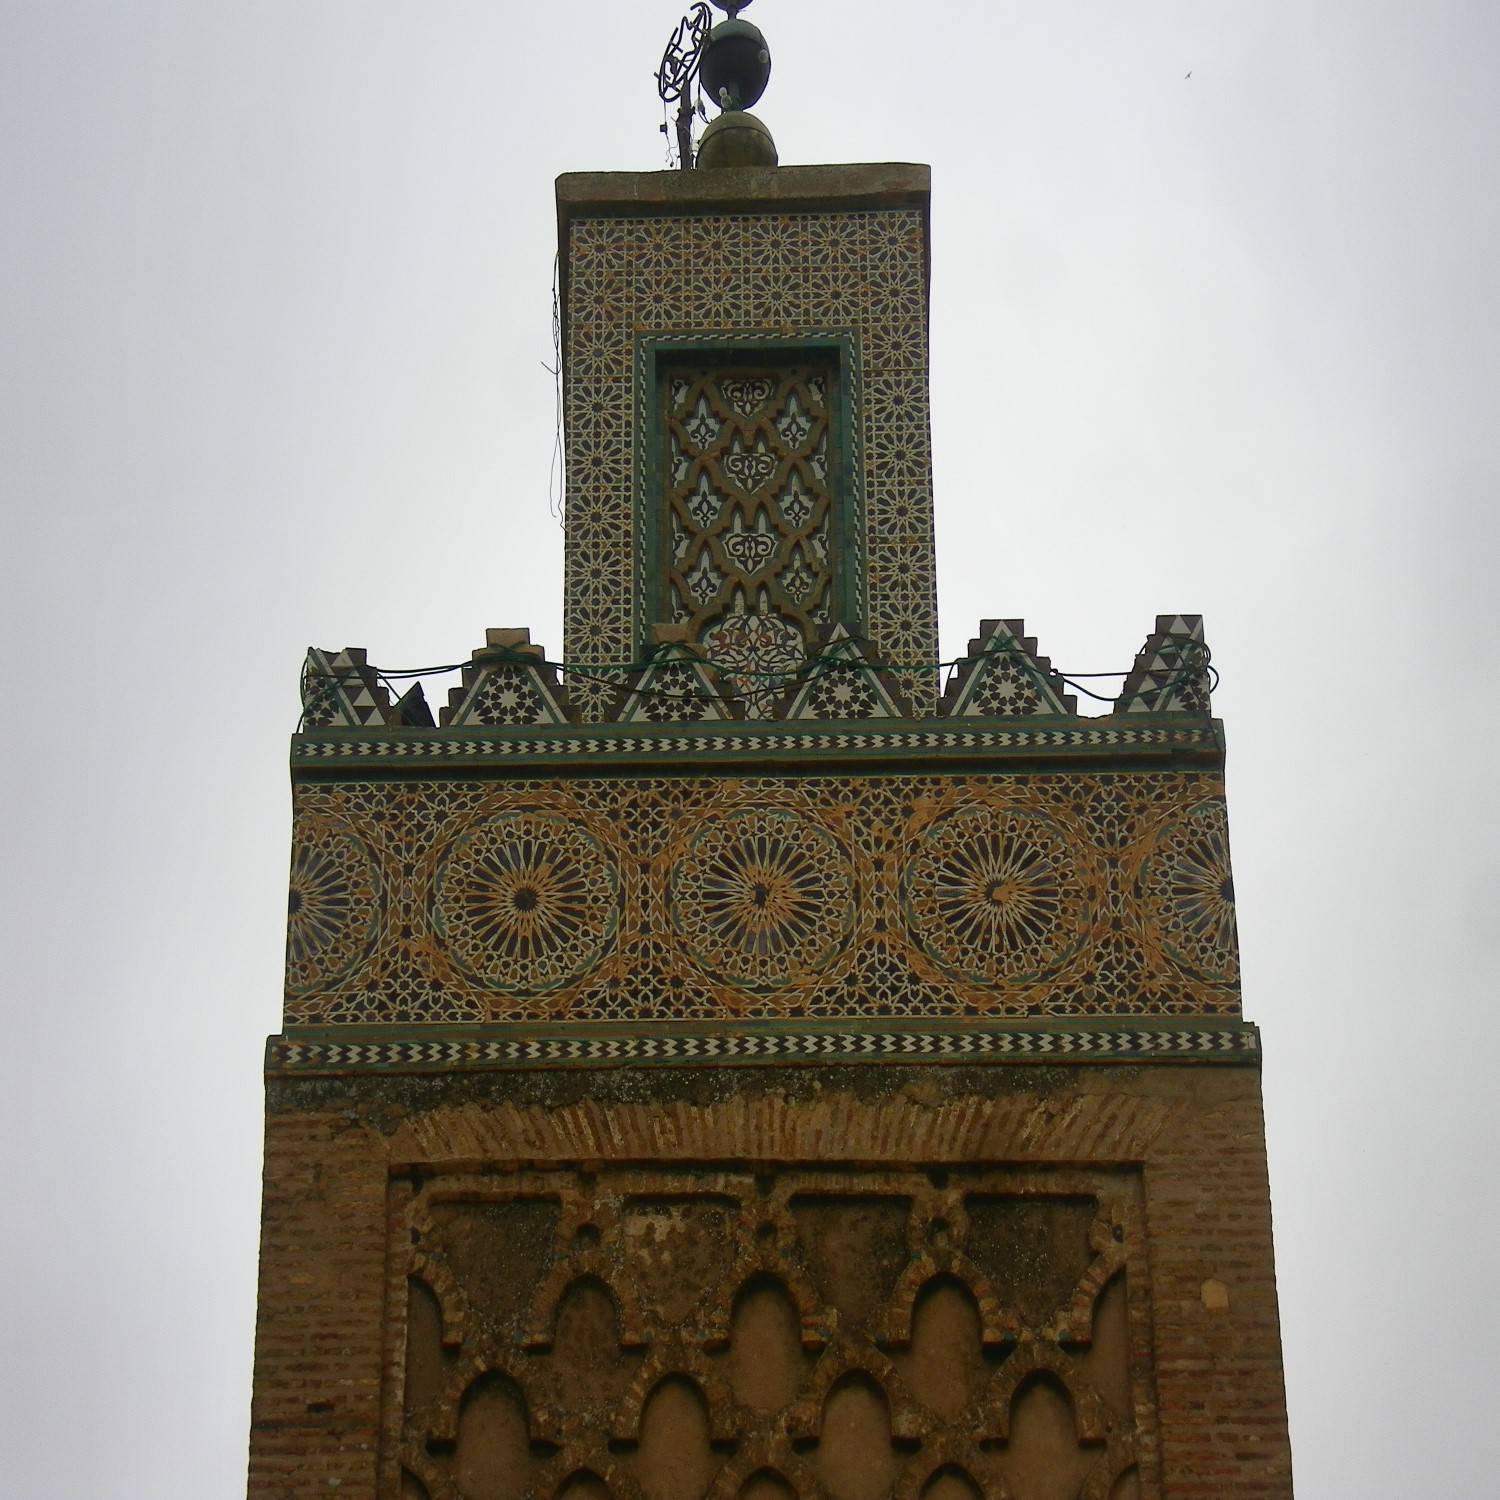 Detail view of the minaret